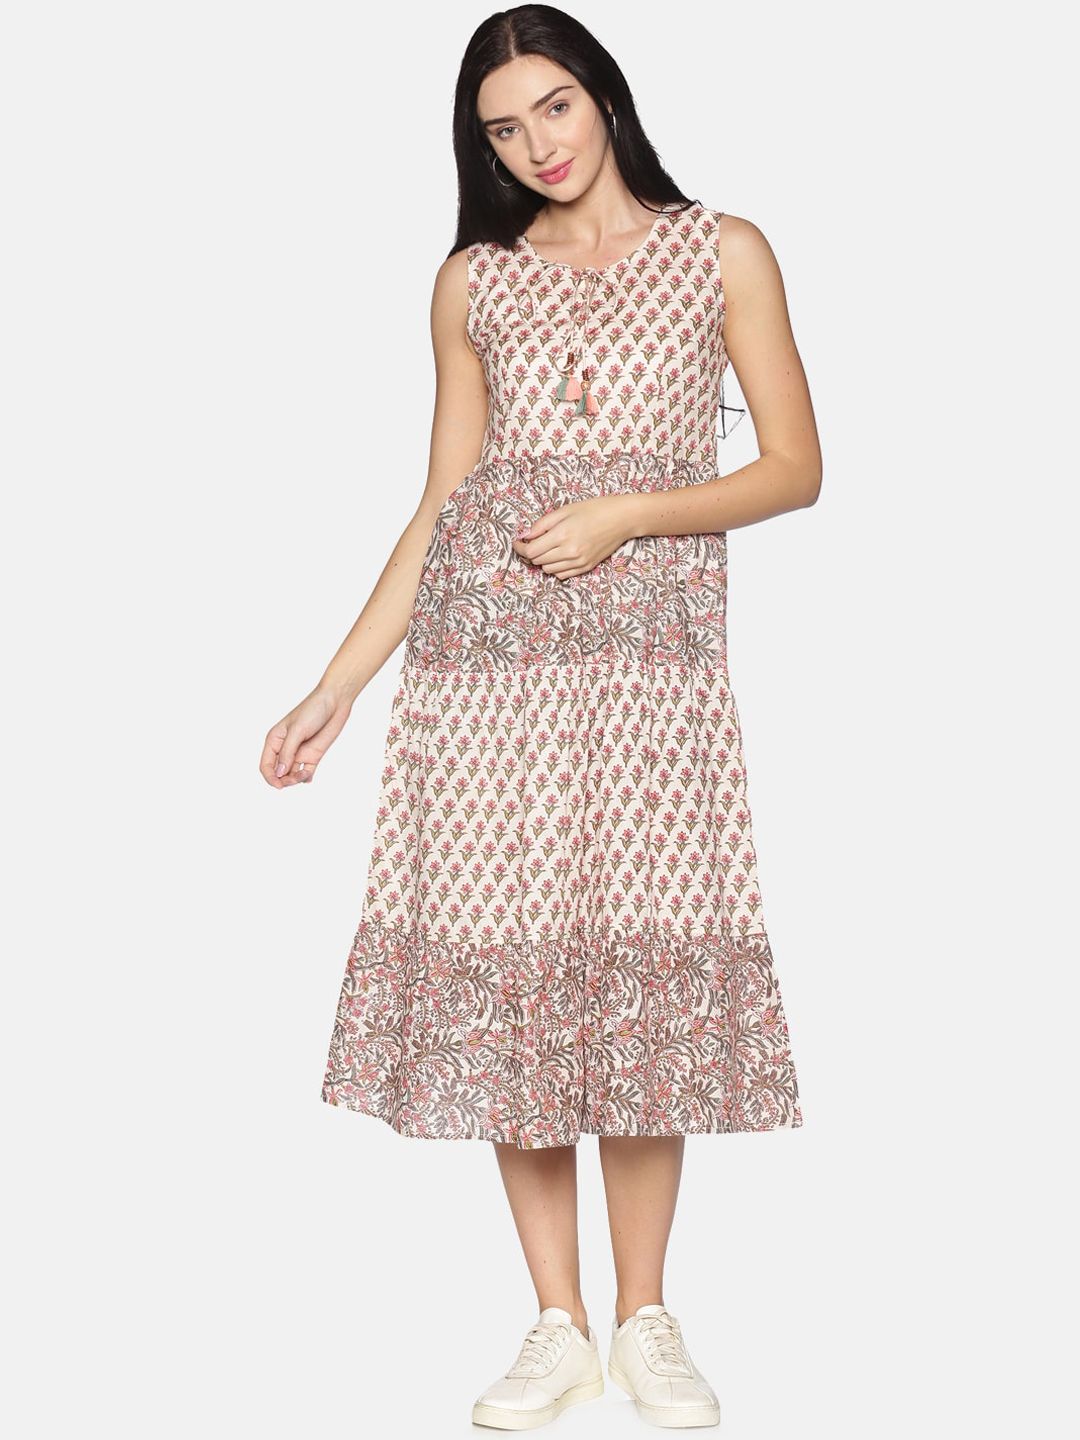 Saffron Threads Women Peach-Coloured Printed Fit and Flare Dress Price in India